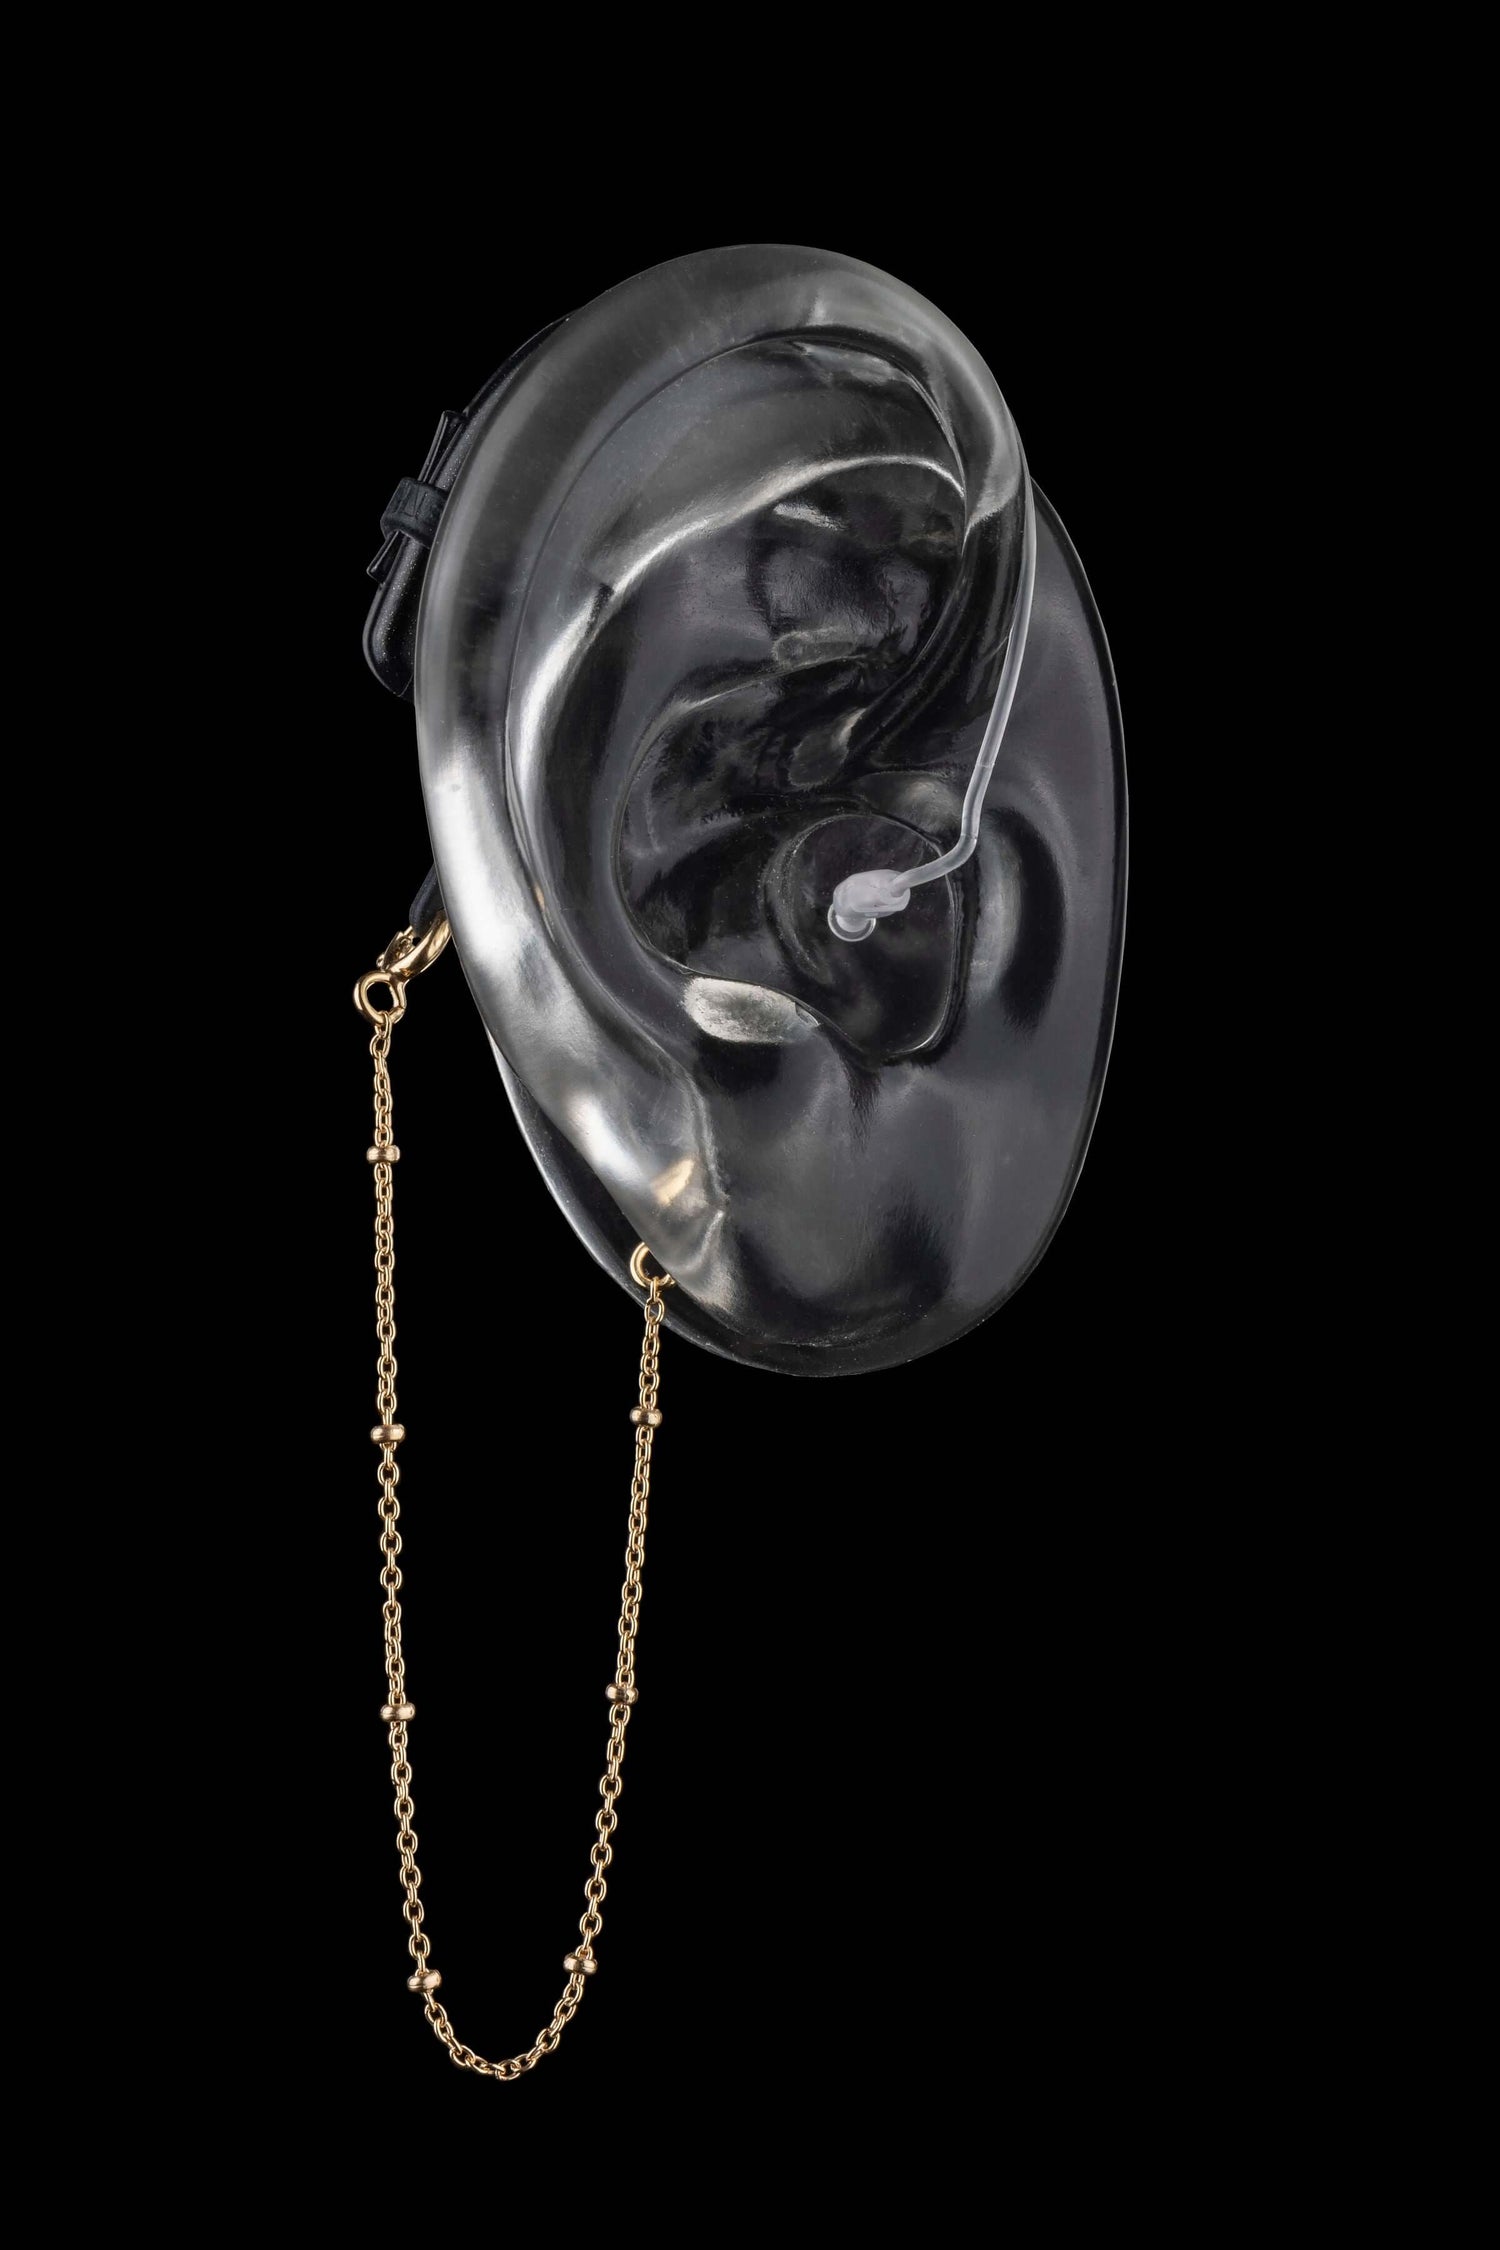 Gold beaded safety chain attached to a clear ear model for hearing aids and cochlear implants, 7cm or 10cm long